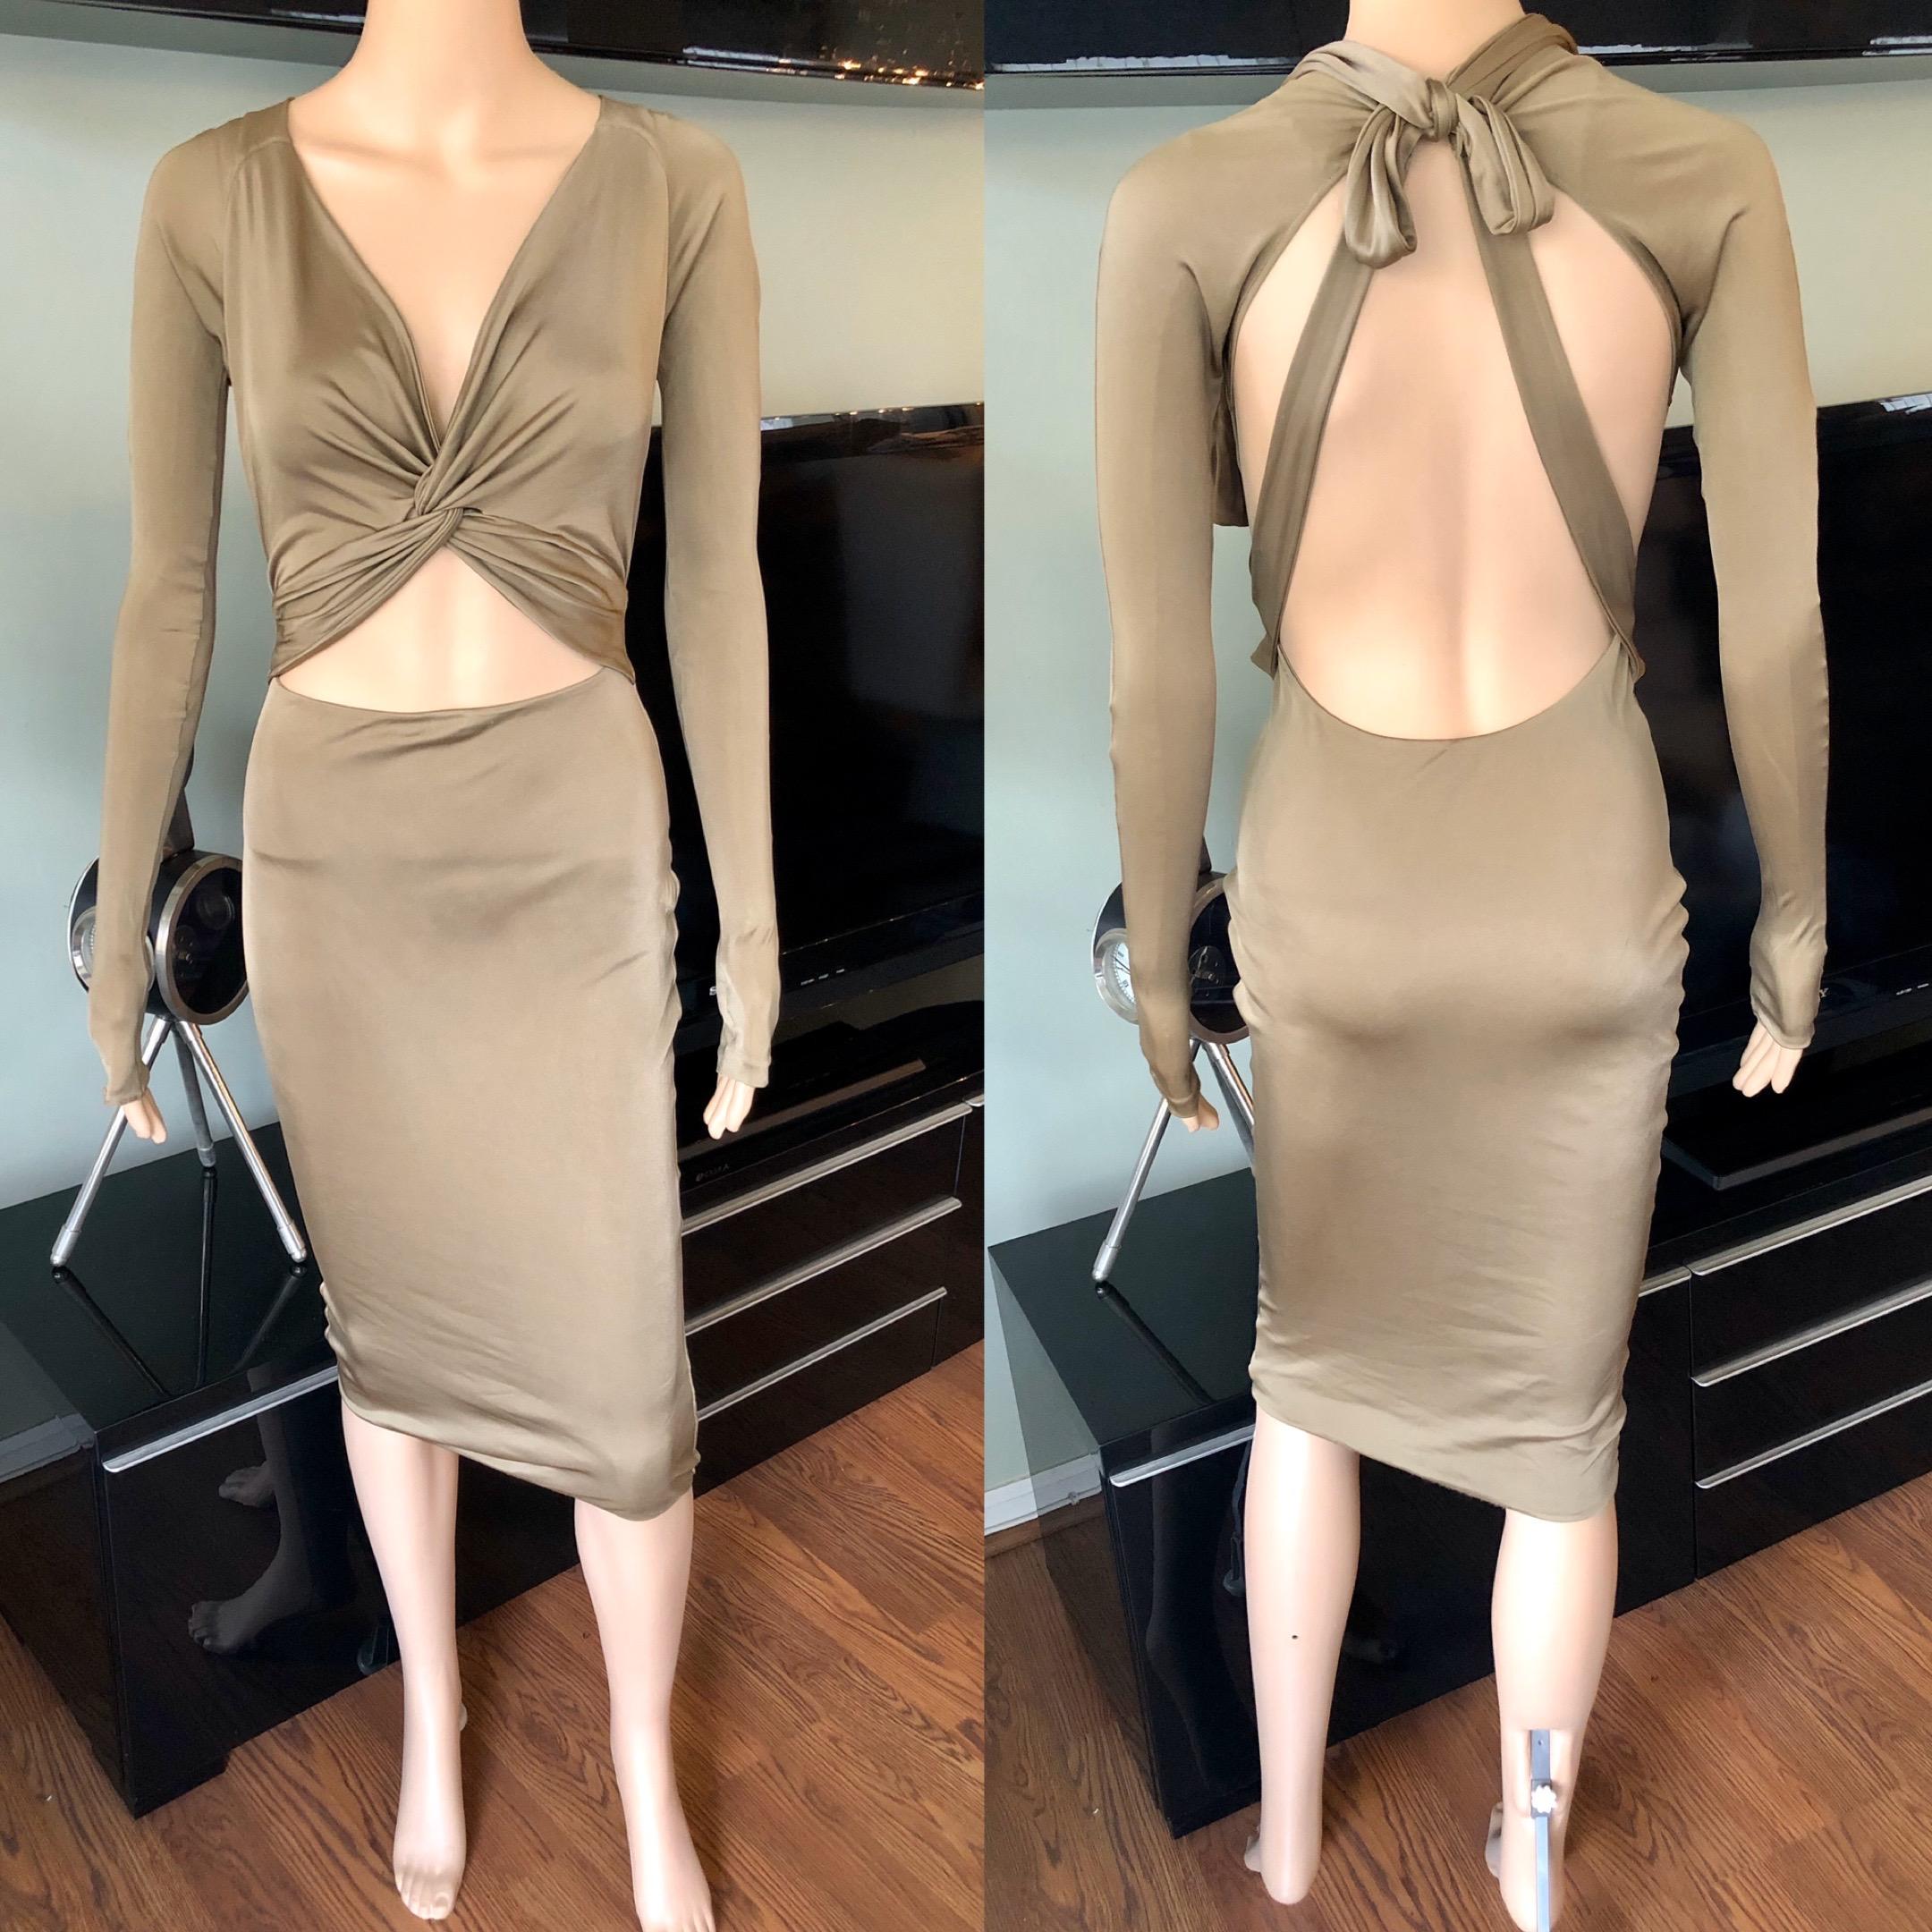 Gucci S/S 2005 Tom Ford Plunging Cutout Backless Bodycon Dress 1